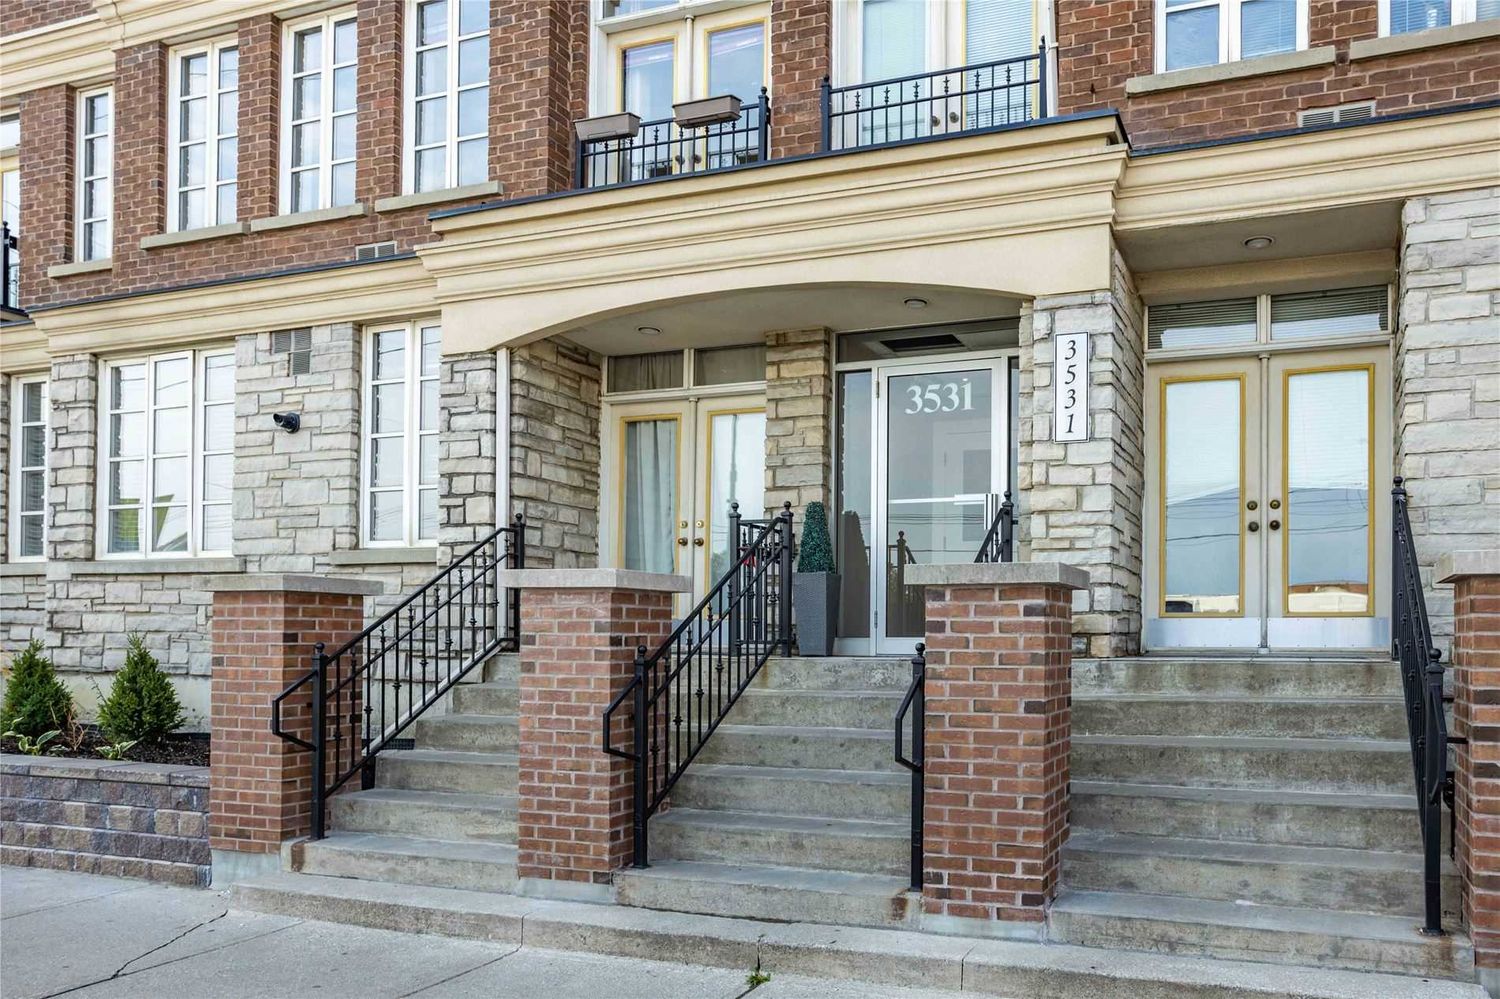 3531 Lake Shore Boulevard W. Waterford Terrace Townhomes is located in  Etobicoke, Toronto - image #2 of 3